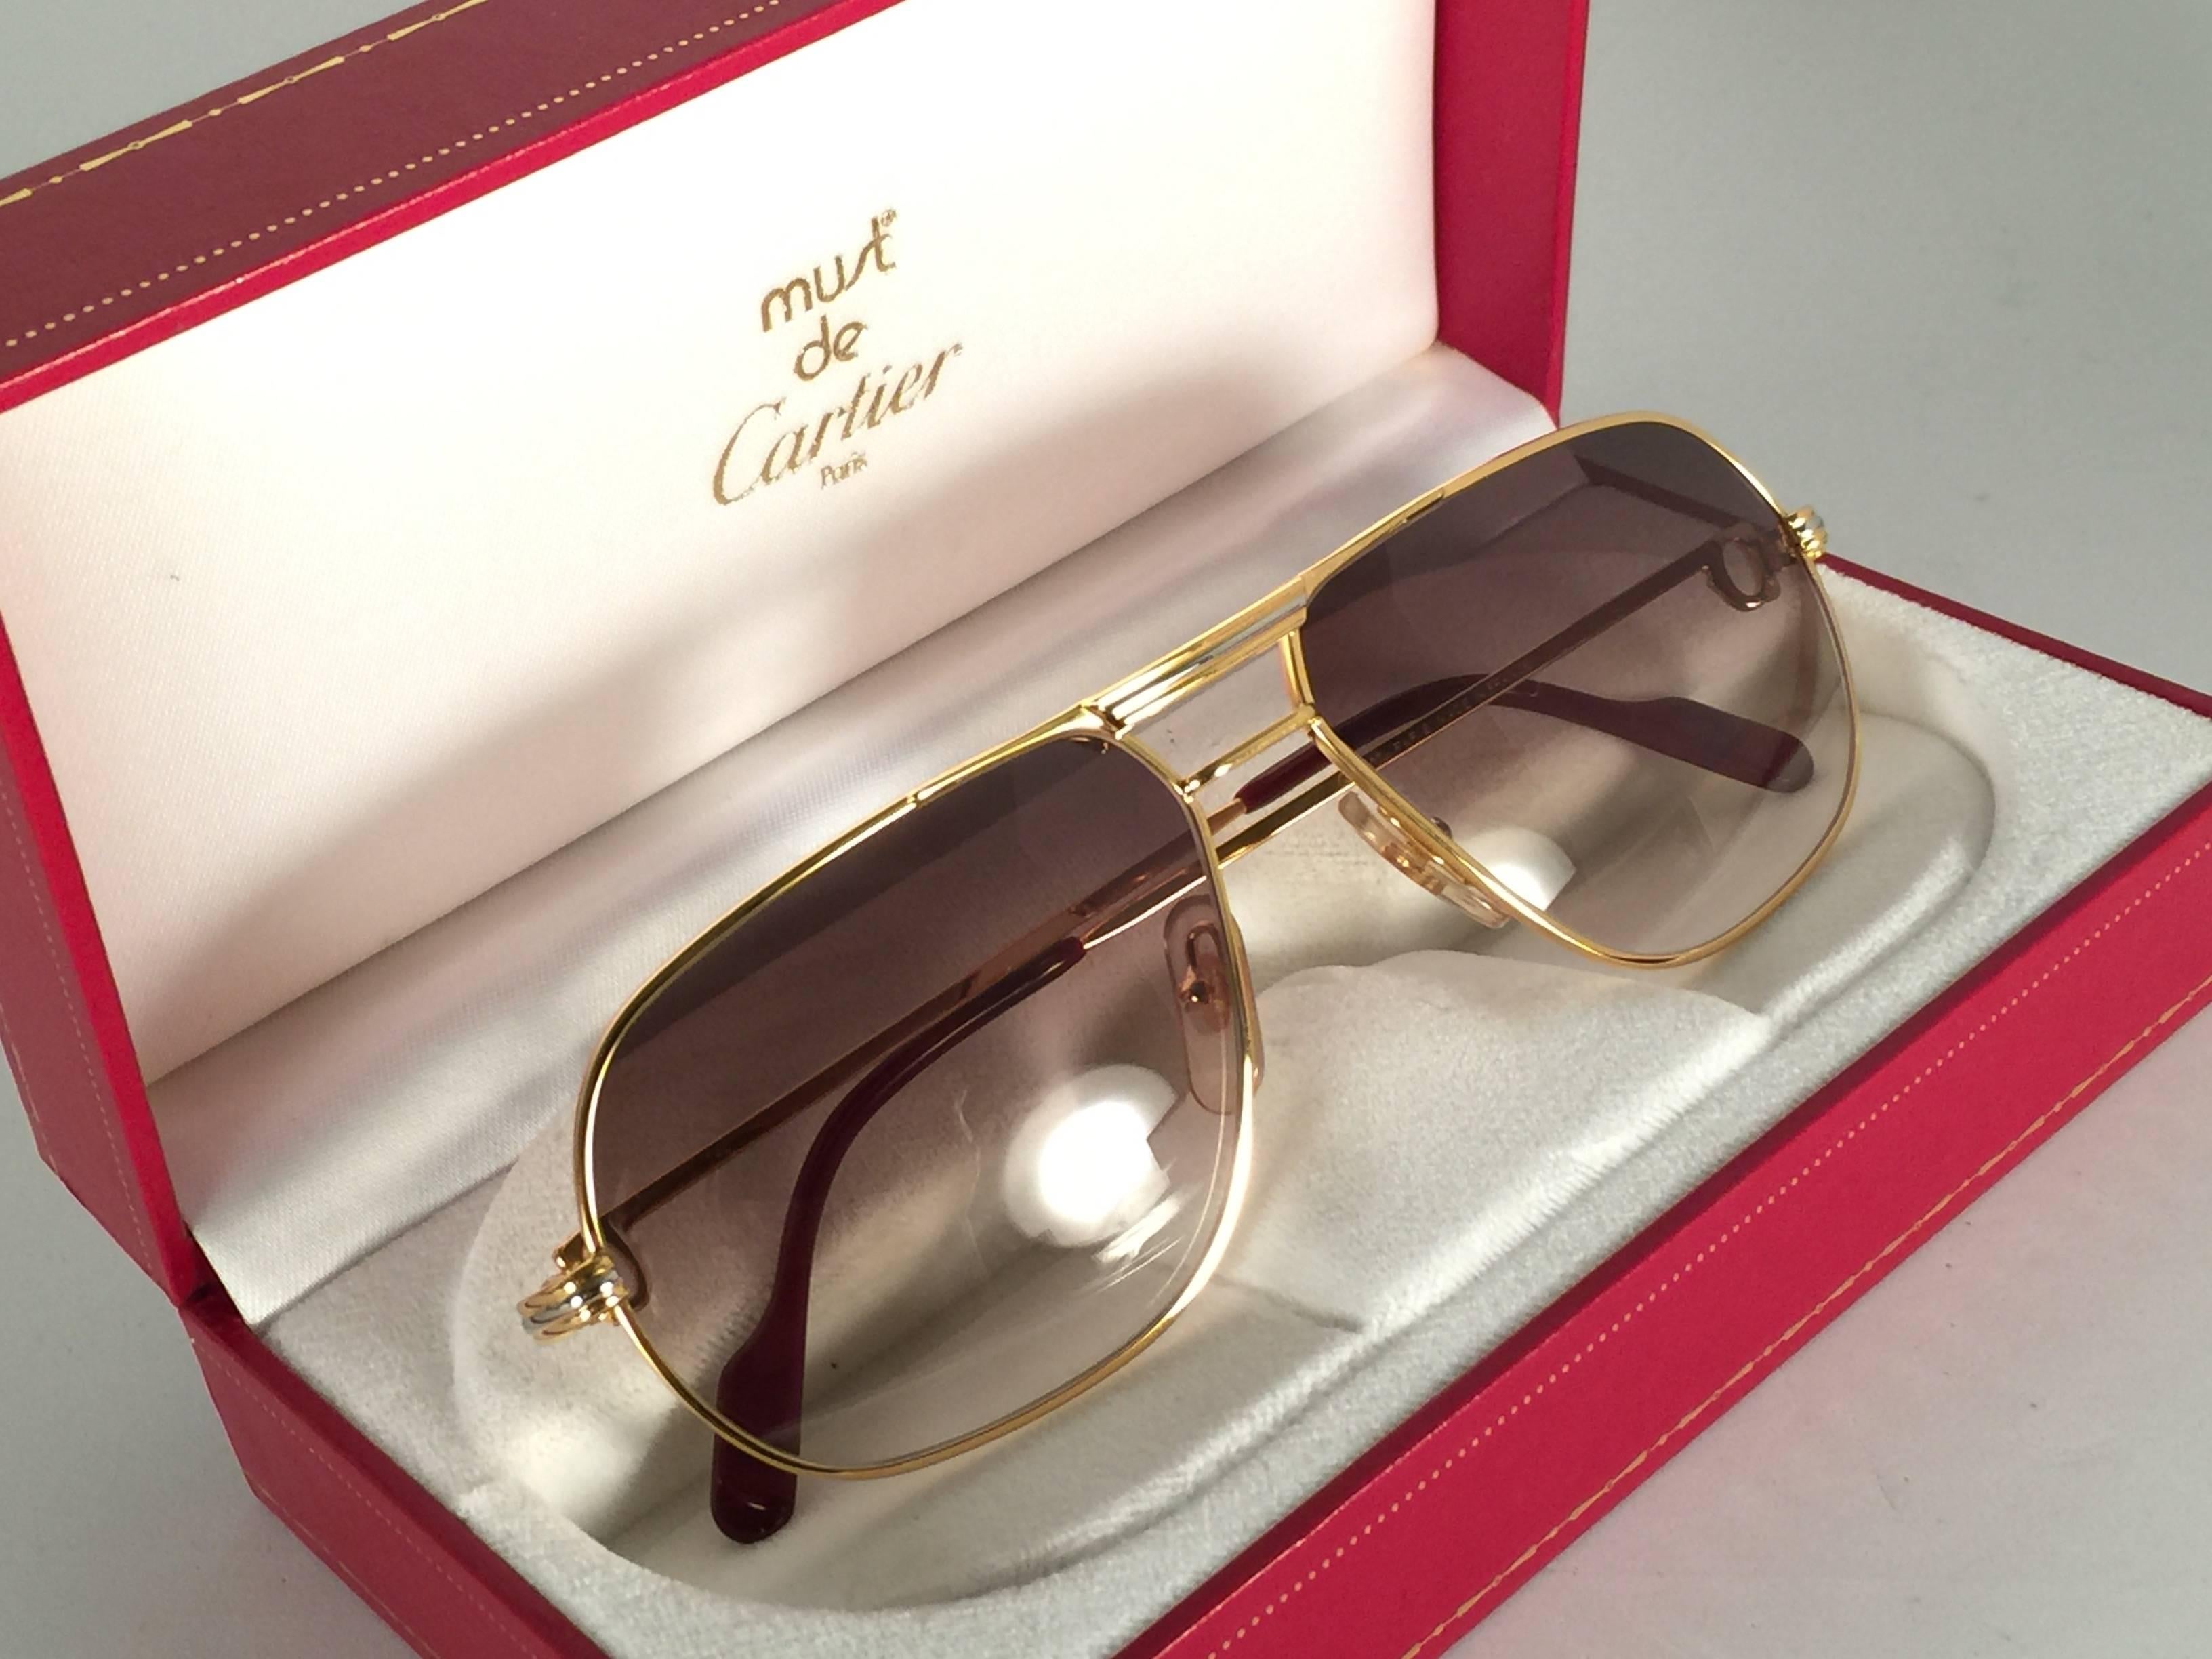 Vintage 1988 Cartier Aviator Tank sunglasses with new honey gradient (uv protection) lenses.
Frame is with the front and sides in yellow and white gold. 
All hallmarks. Enamel with Cartier gold signs on the earpaddles. So classy, both arms sport the